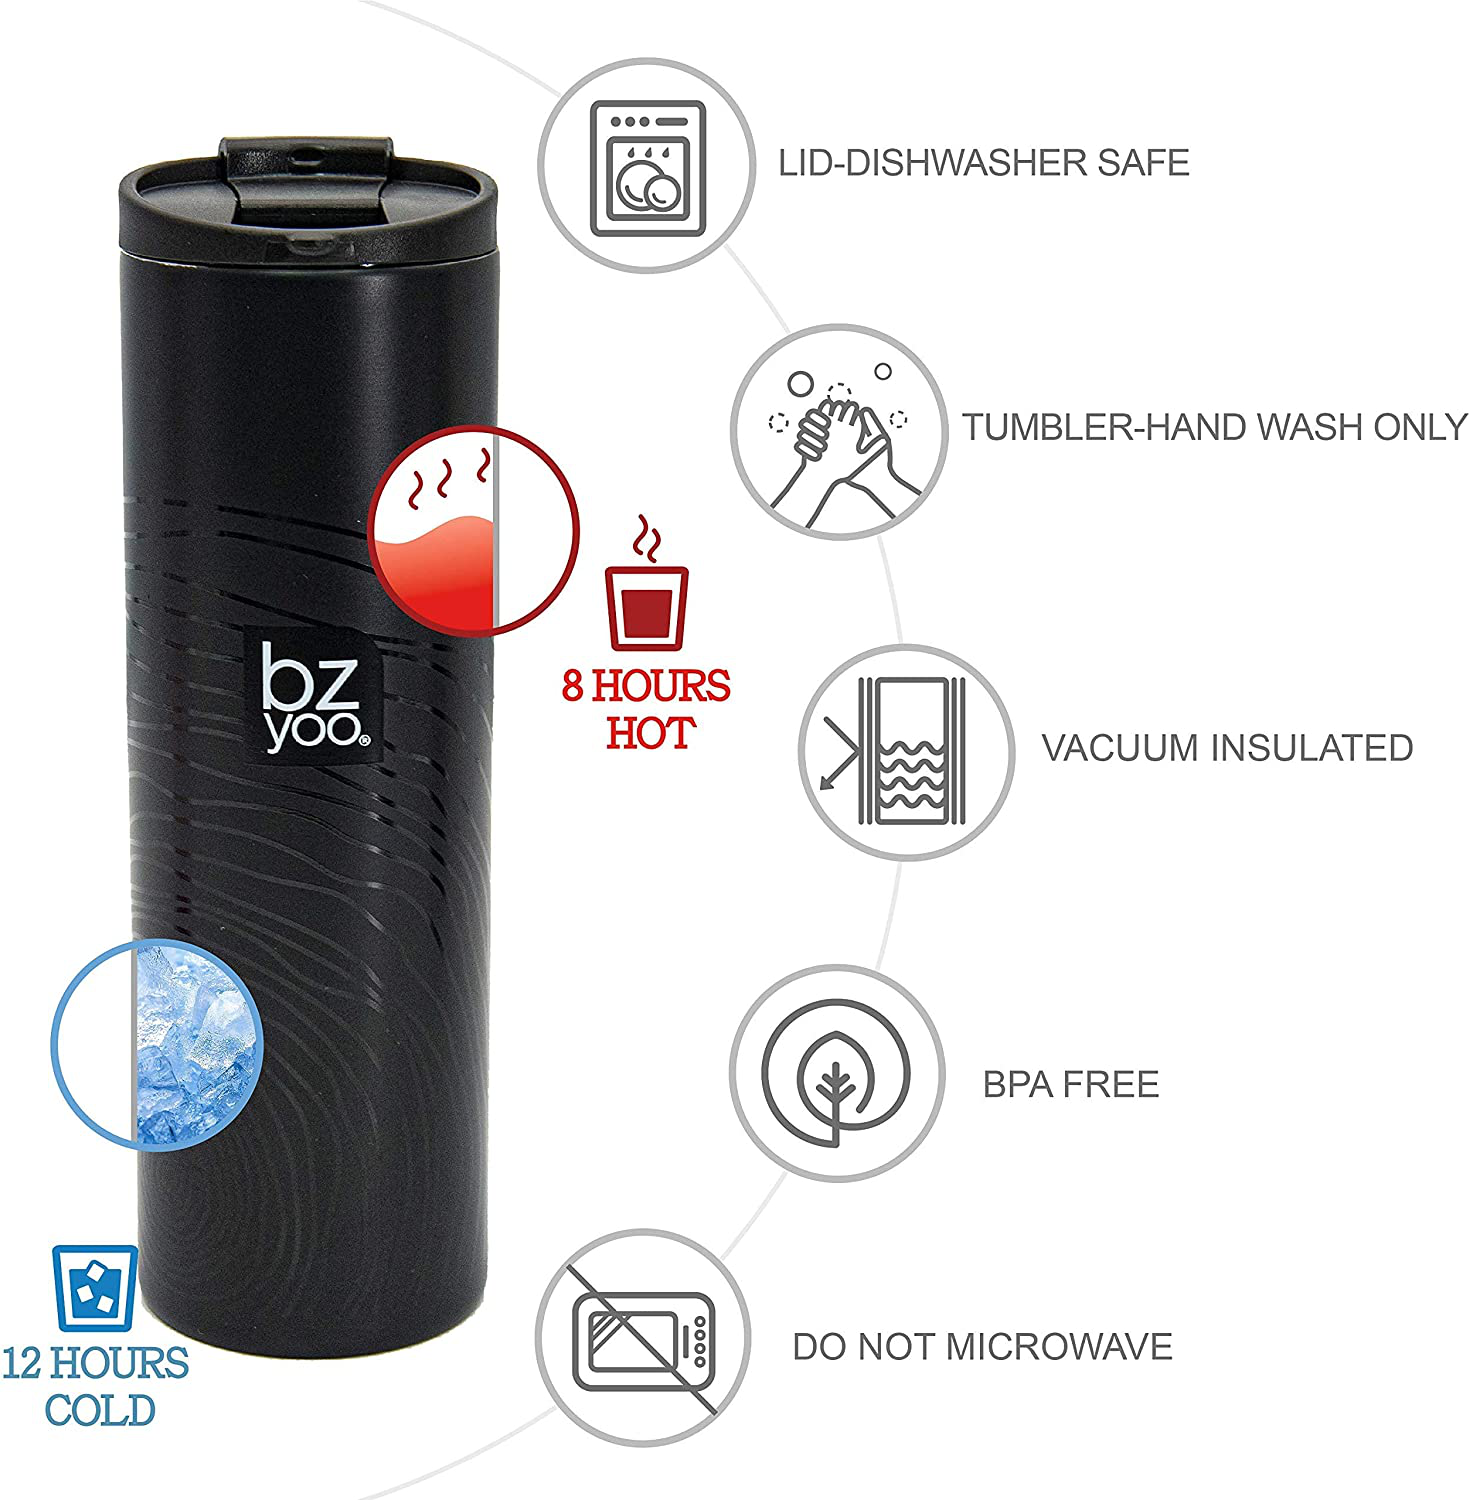 bzyoo Brew 18/8 Stainless Vacuum Drinking BPA-Free 16oz Coffee Mug Water Thermal Bottle with Leak Proof Design for Hike Camping Holiday New Year Gifts Wellness (Organica, White)